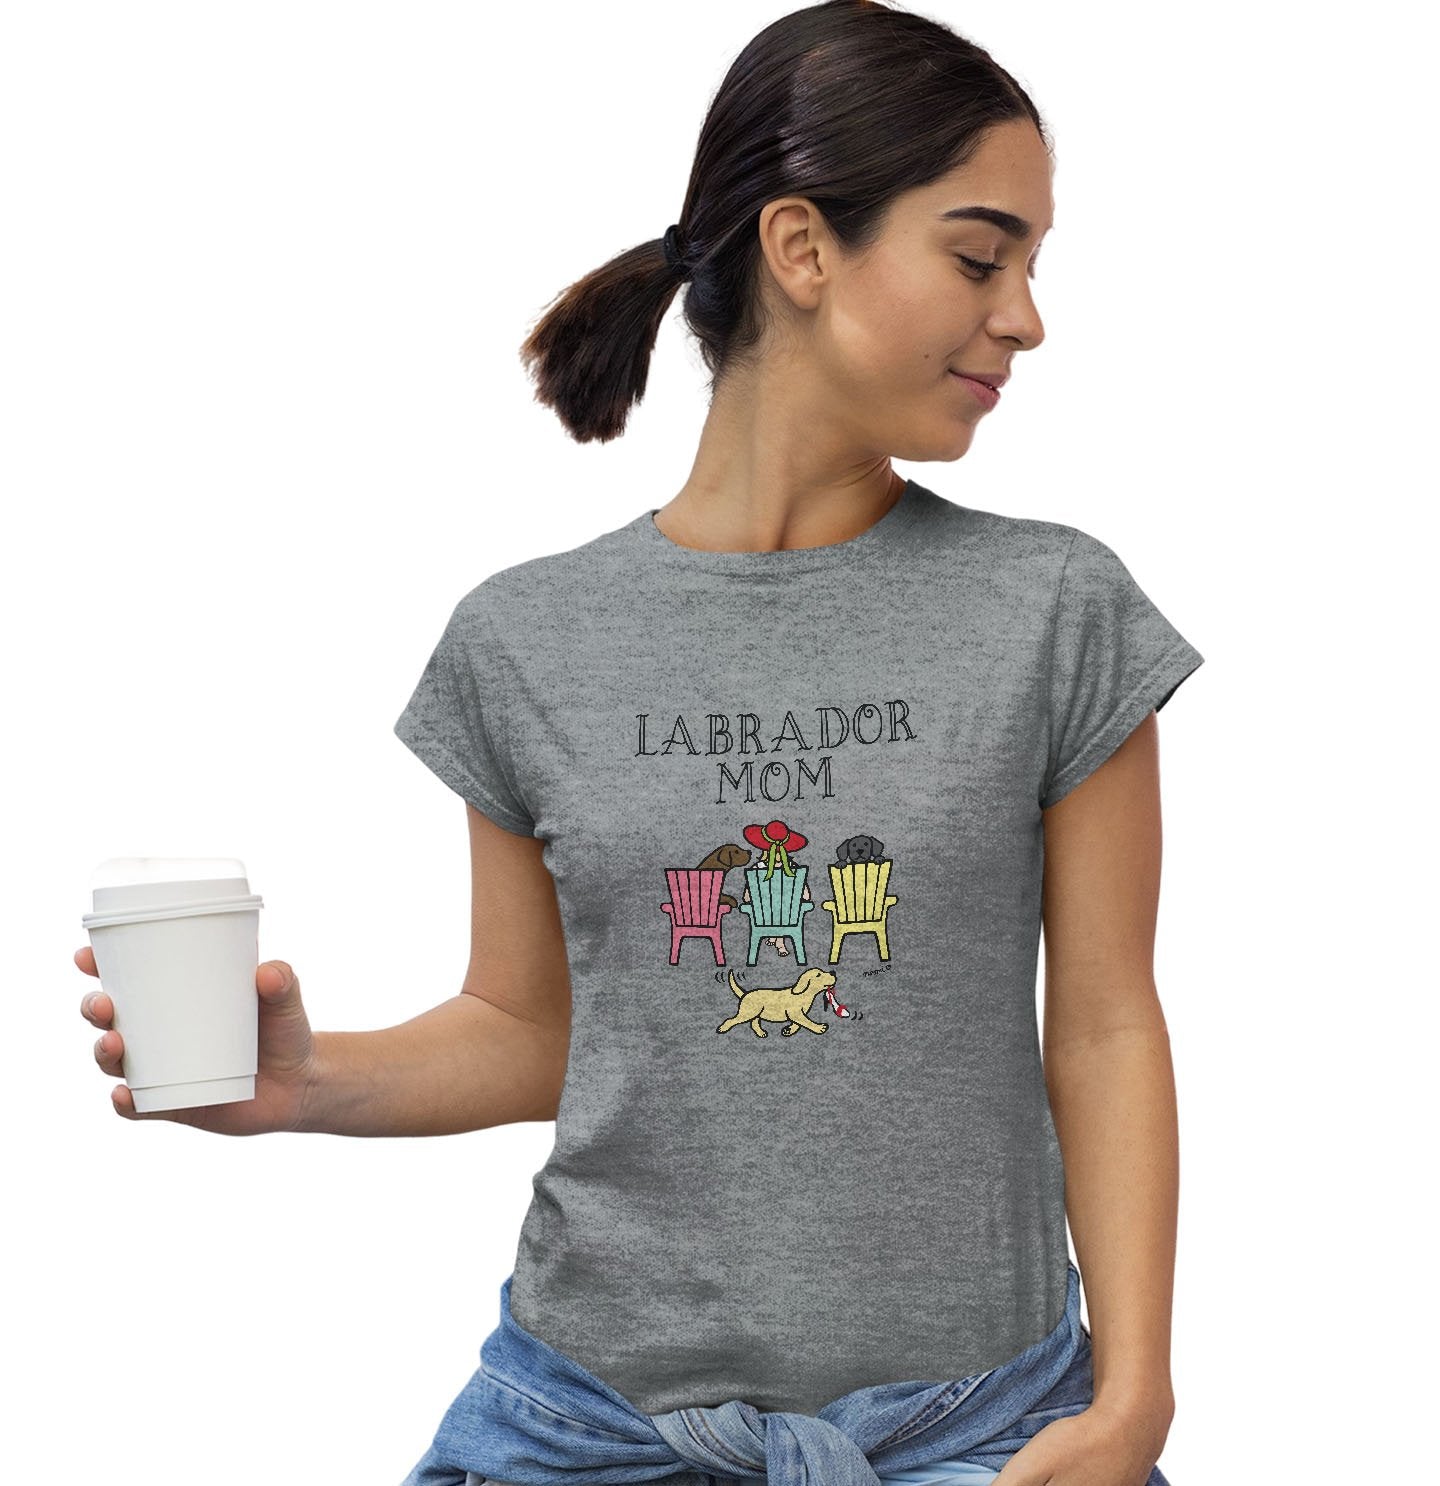 Labrador Dog Mom - Deck Chairs Design - Women's Fitted T-Shirt